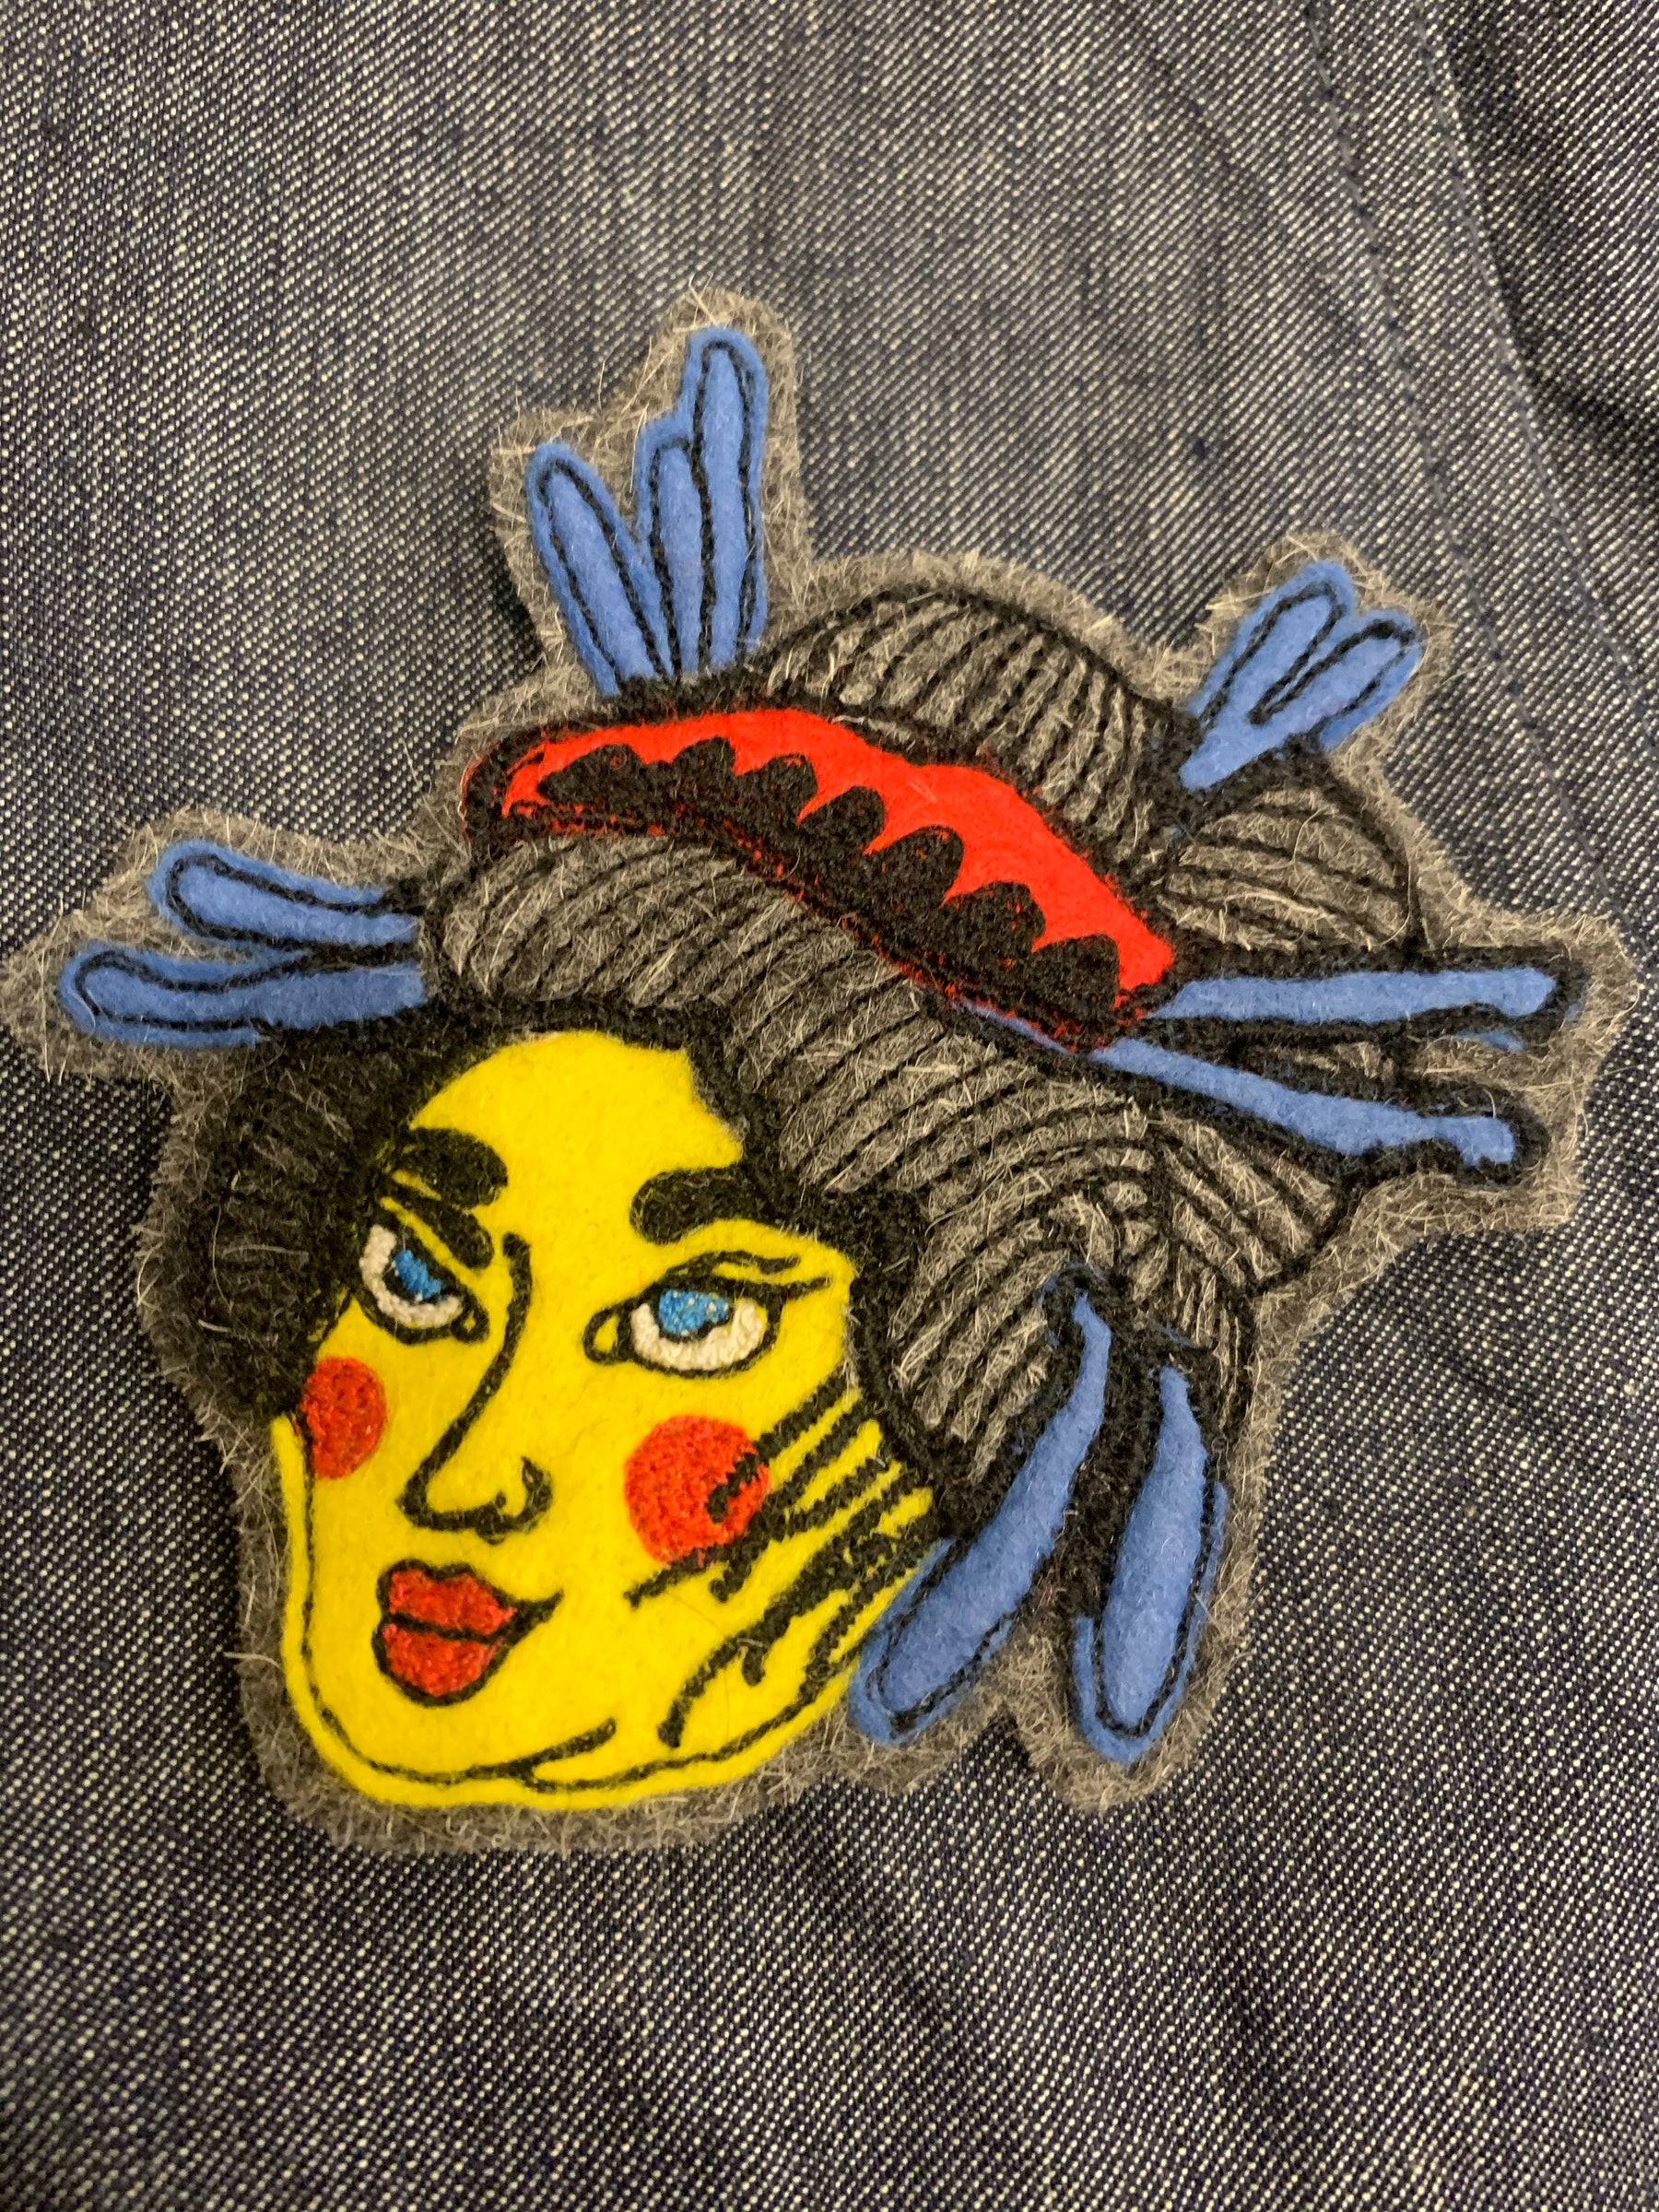 Japanese Geisha Inspired Face Hand Stitched Embroidered Patch (Working Title exclusive) , Patch, Art + Object, Working Title